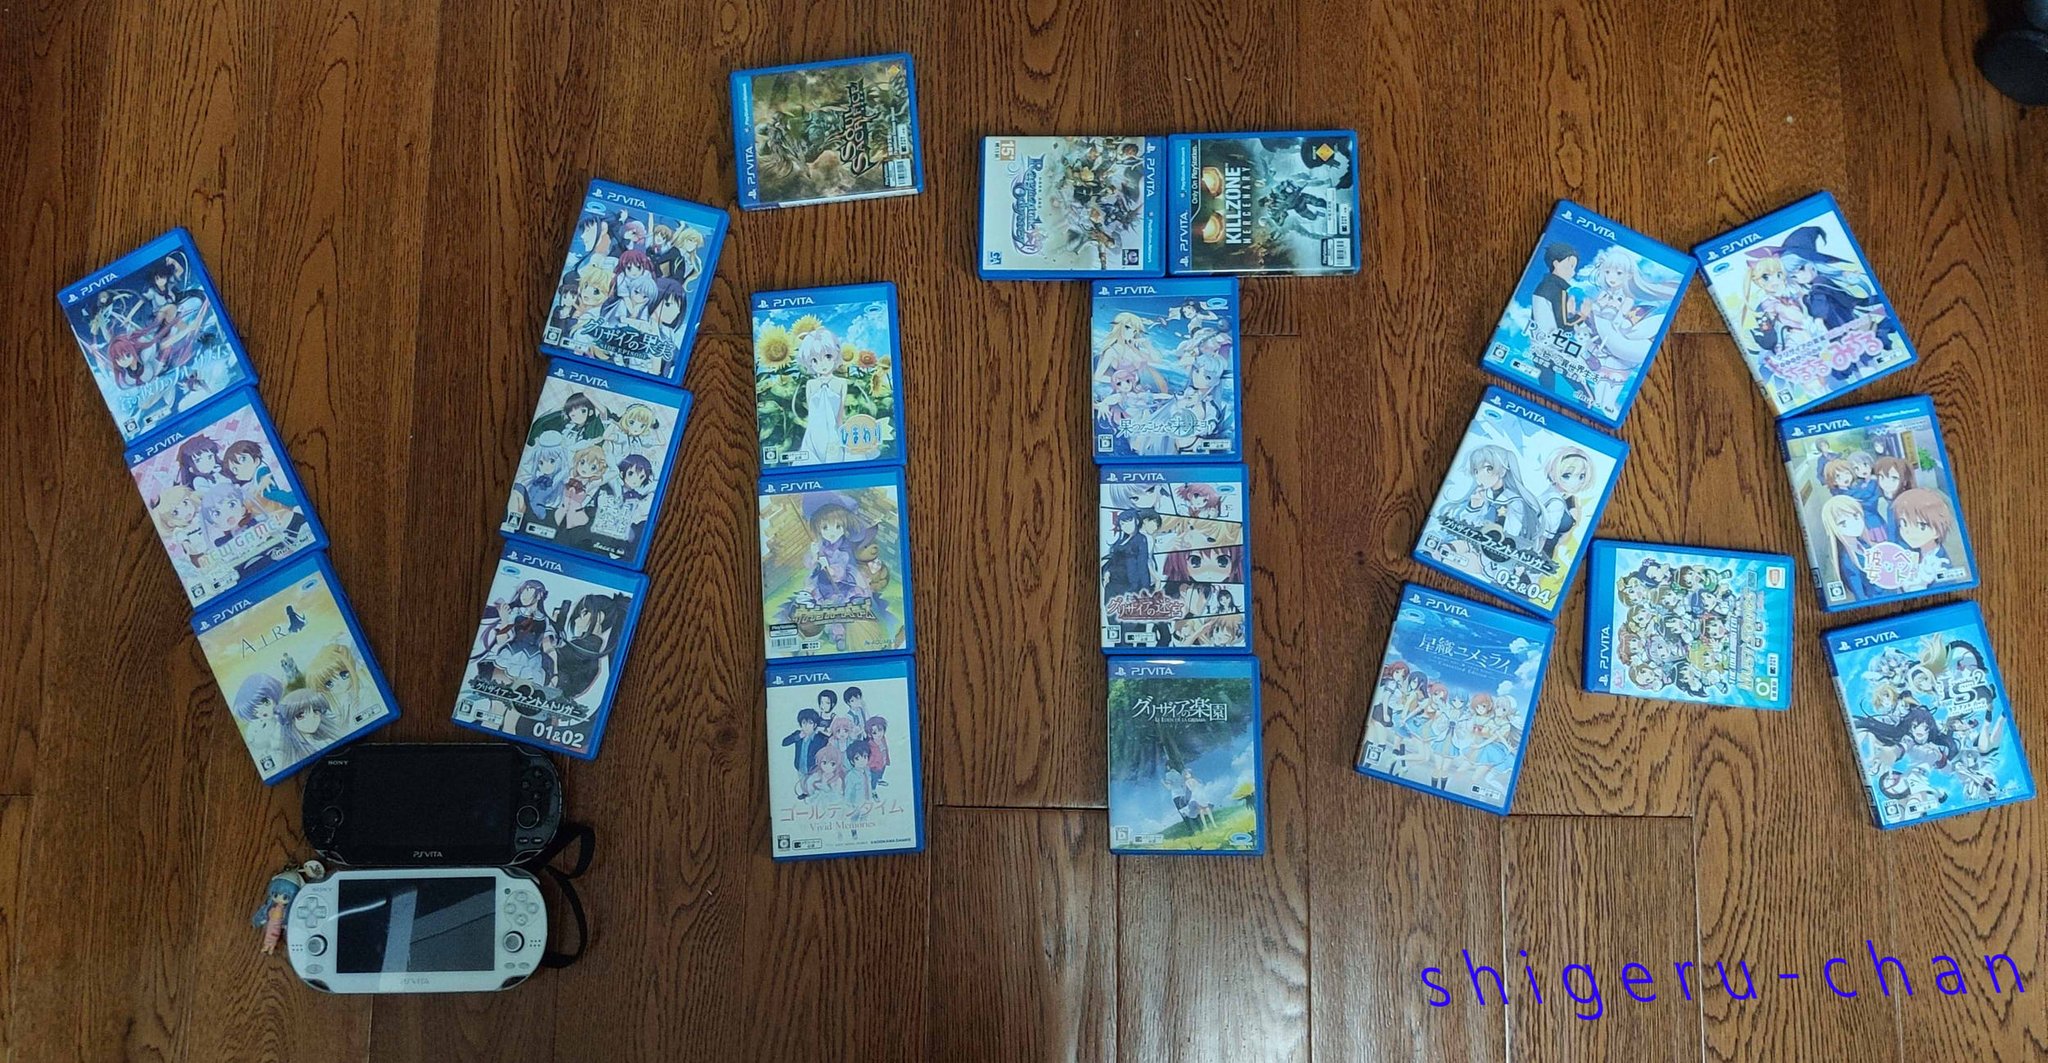 Shigeru My Ps Vita Collection I M A Girl Gamer Nice To Meet You It S Thread Of Detail What I Play And My New Loot From Now Mostly Japanese Gal Game